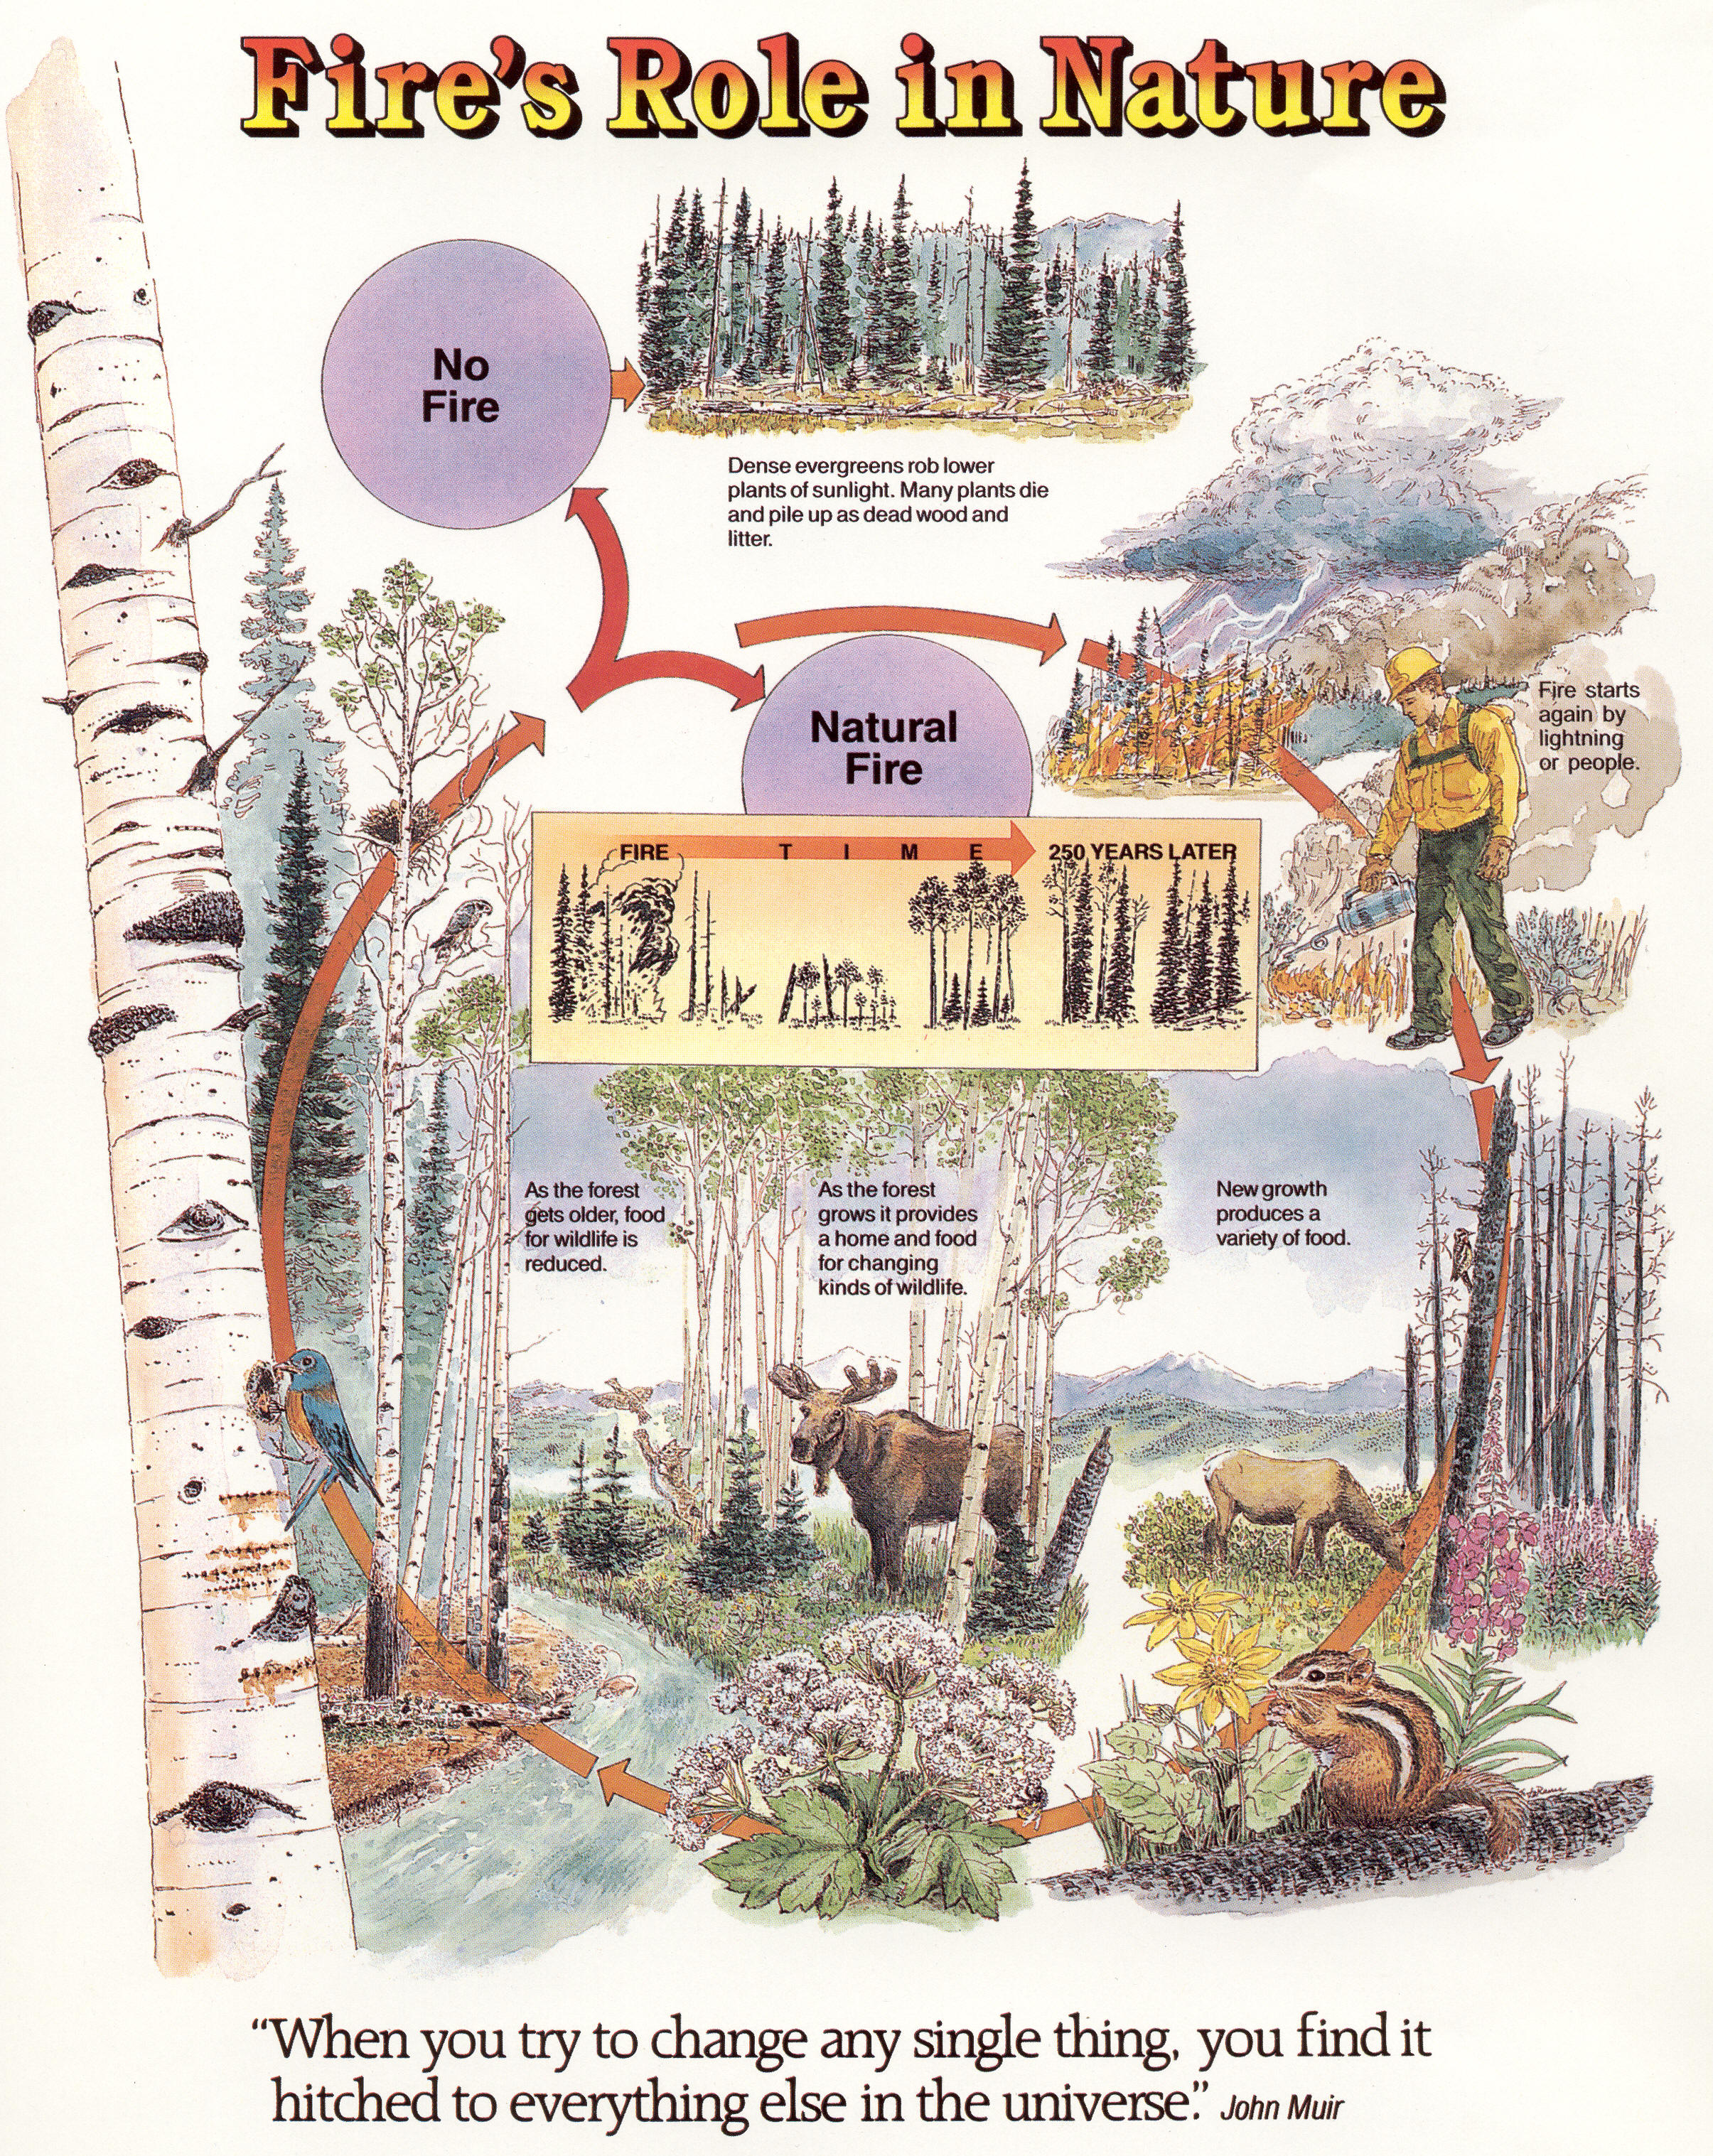 Educational Poster illustrated with fire's role in nature